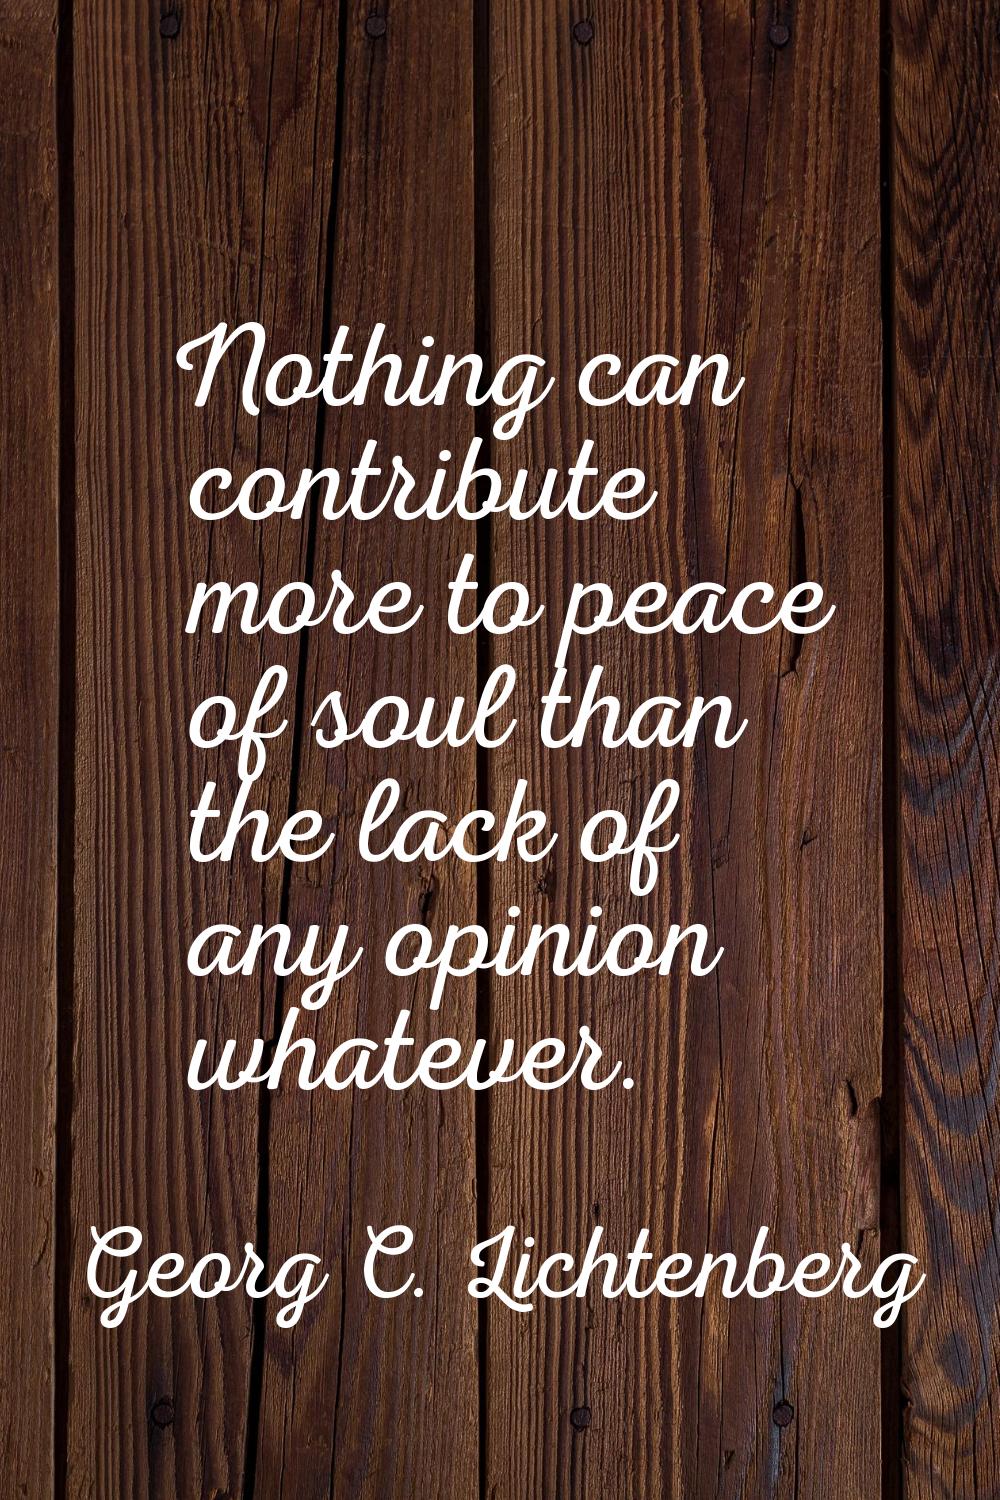 Nothing can contribute more to peace of soul than the lack of any opinion whatever.